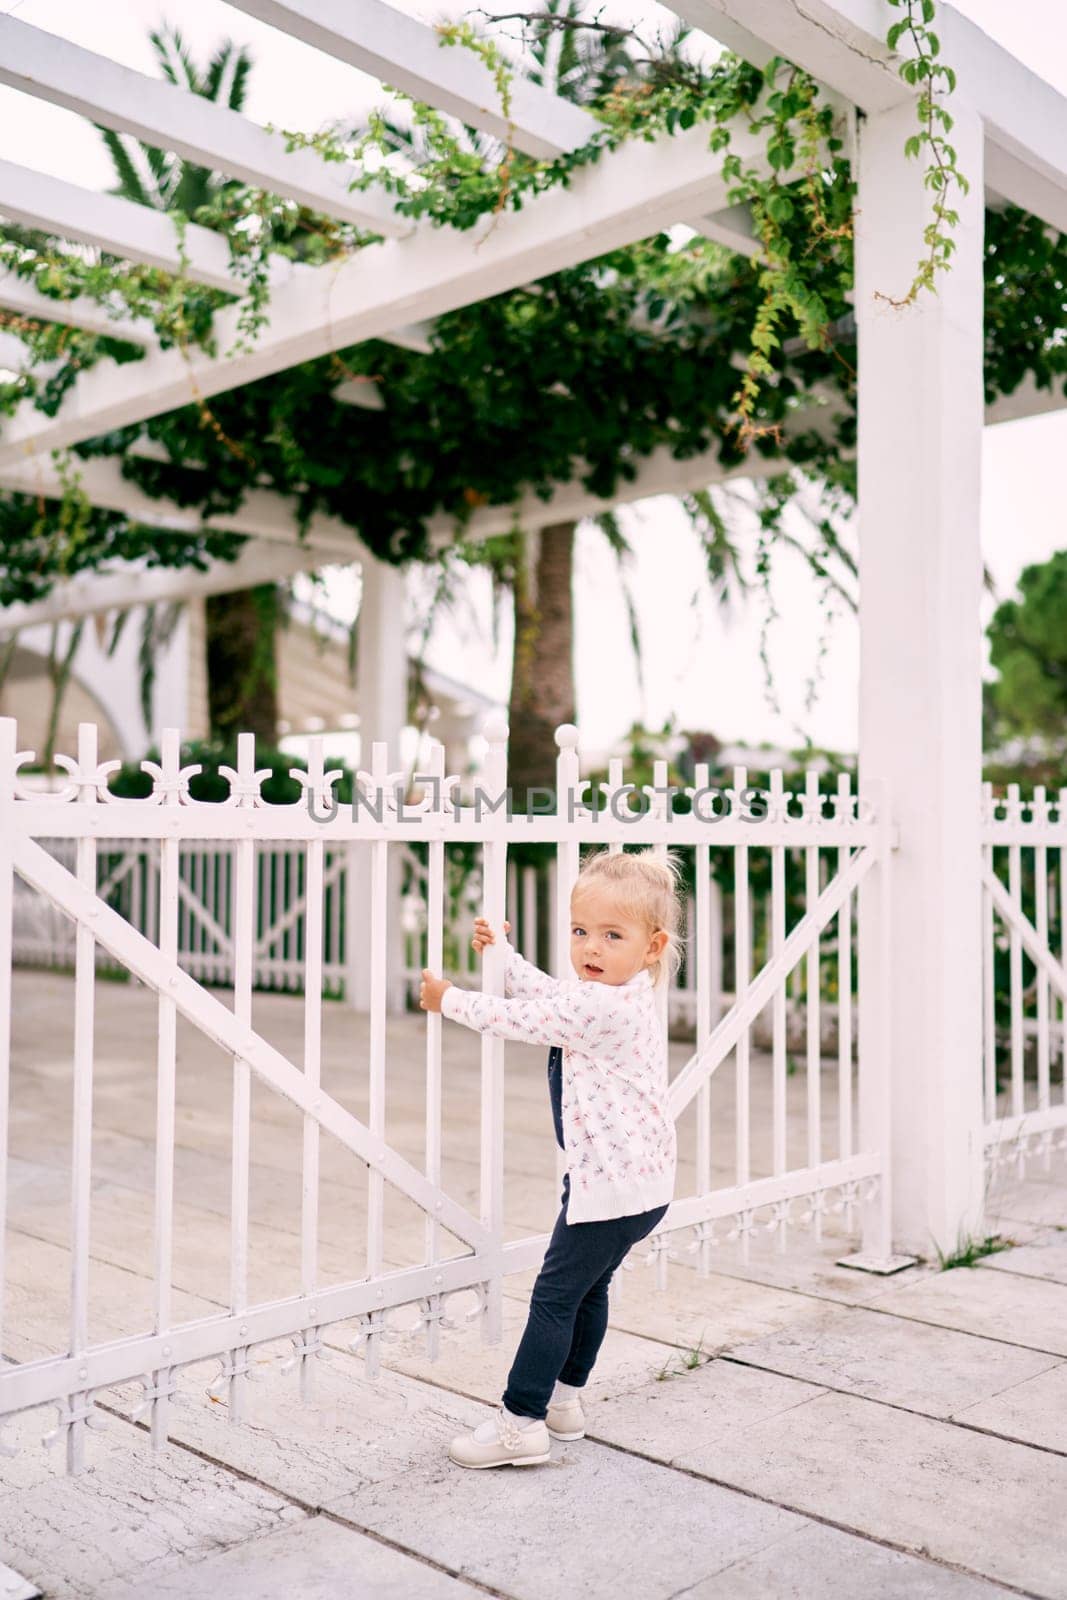 Little girl stands near a pergola fence, holding on to it with her hands and turning her head to the side by Nadtochiy